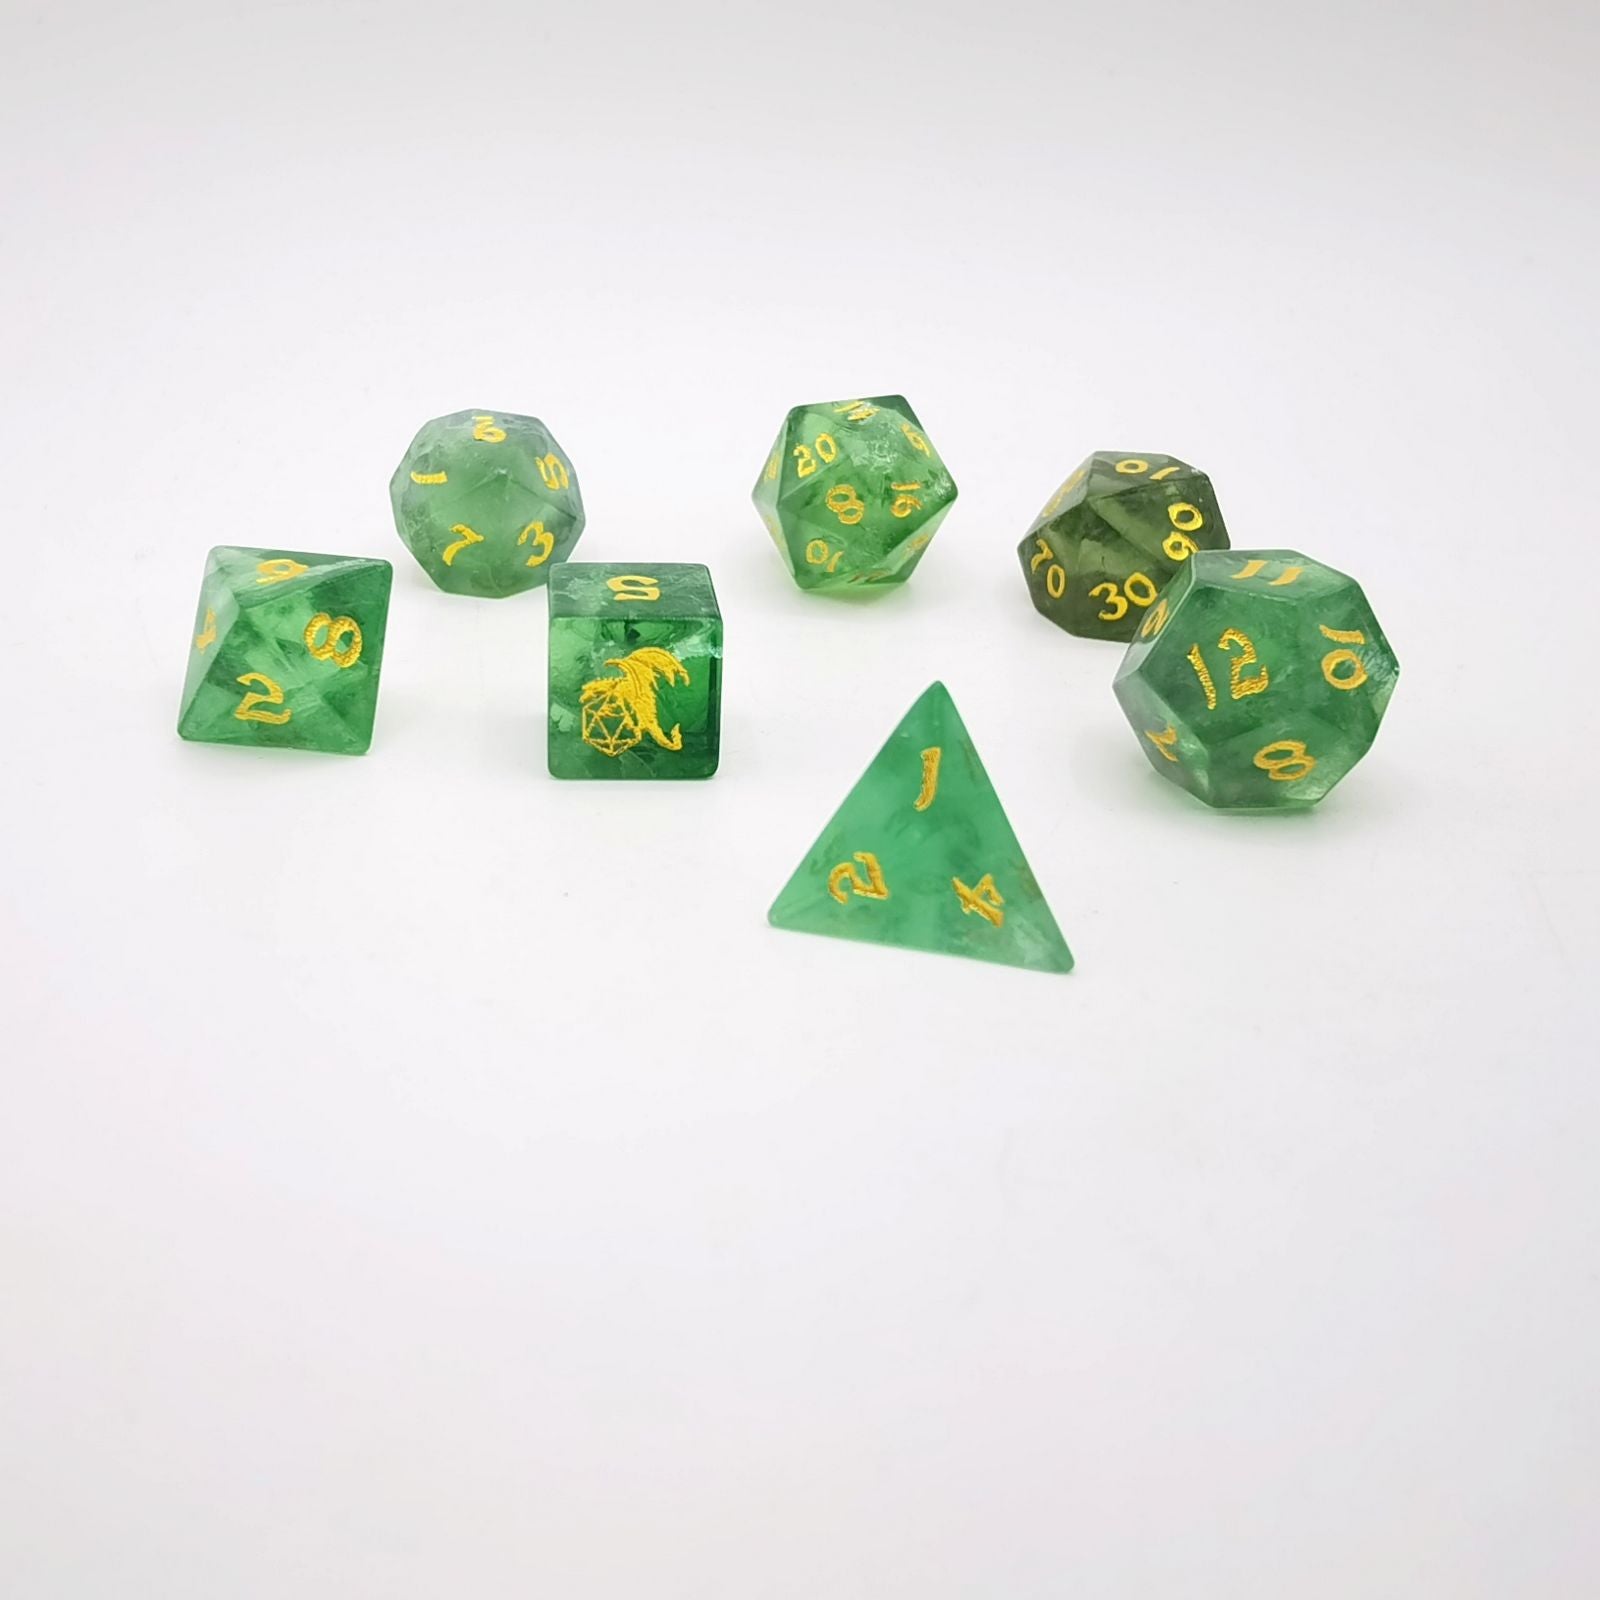 Green Fluorite dice set 7 pieces die handmade for D&D games - HYMGHO Dice 